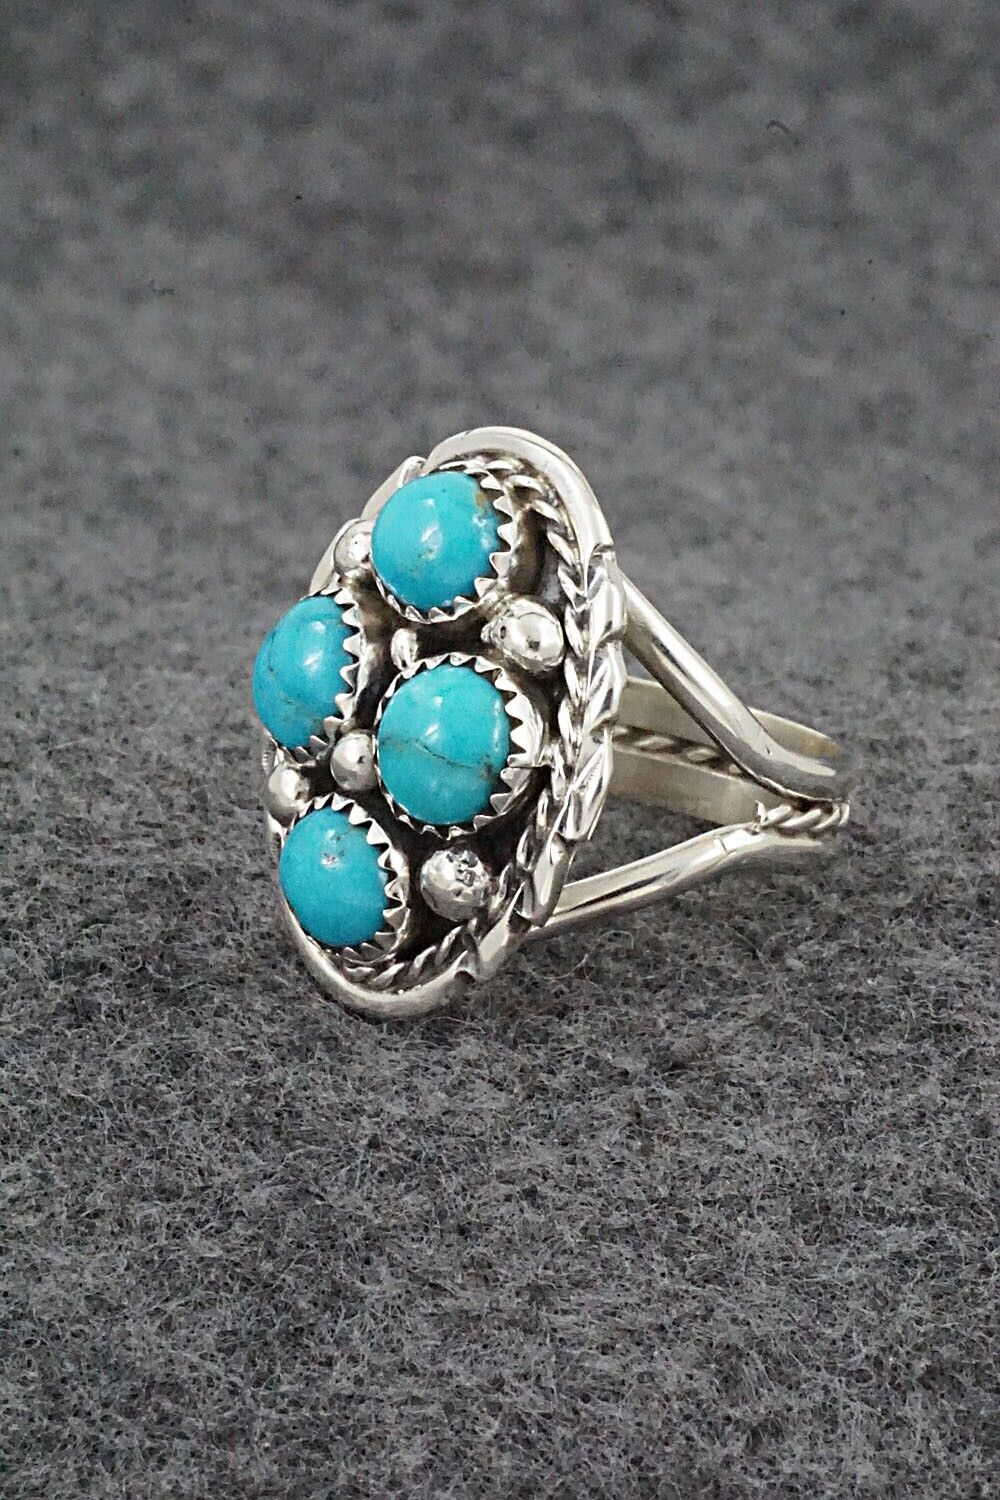 Turquoise & Sterling Silver Ring - Melvin Chee - Size 8.25